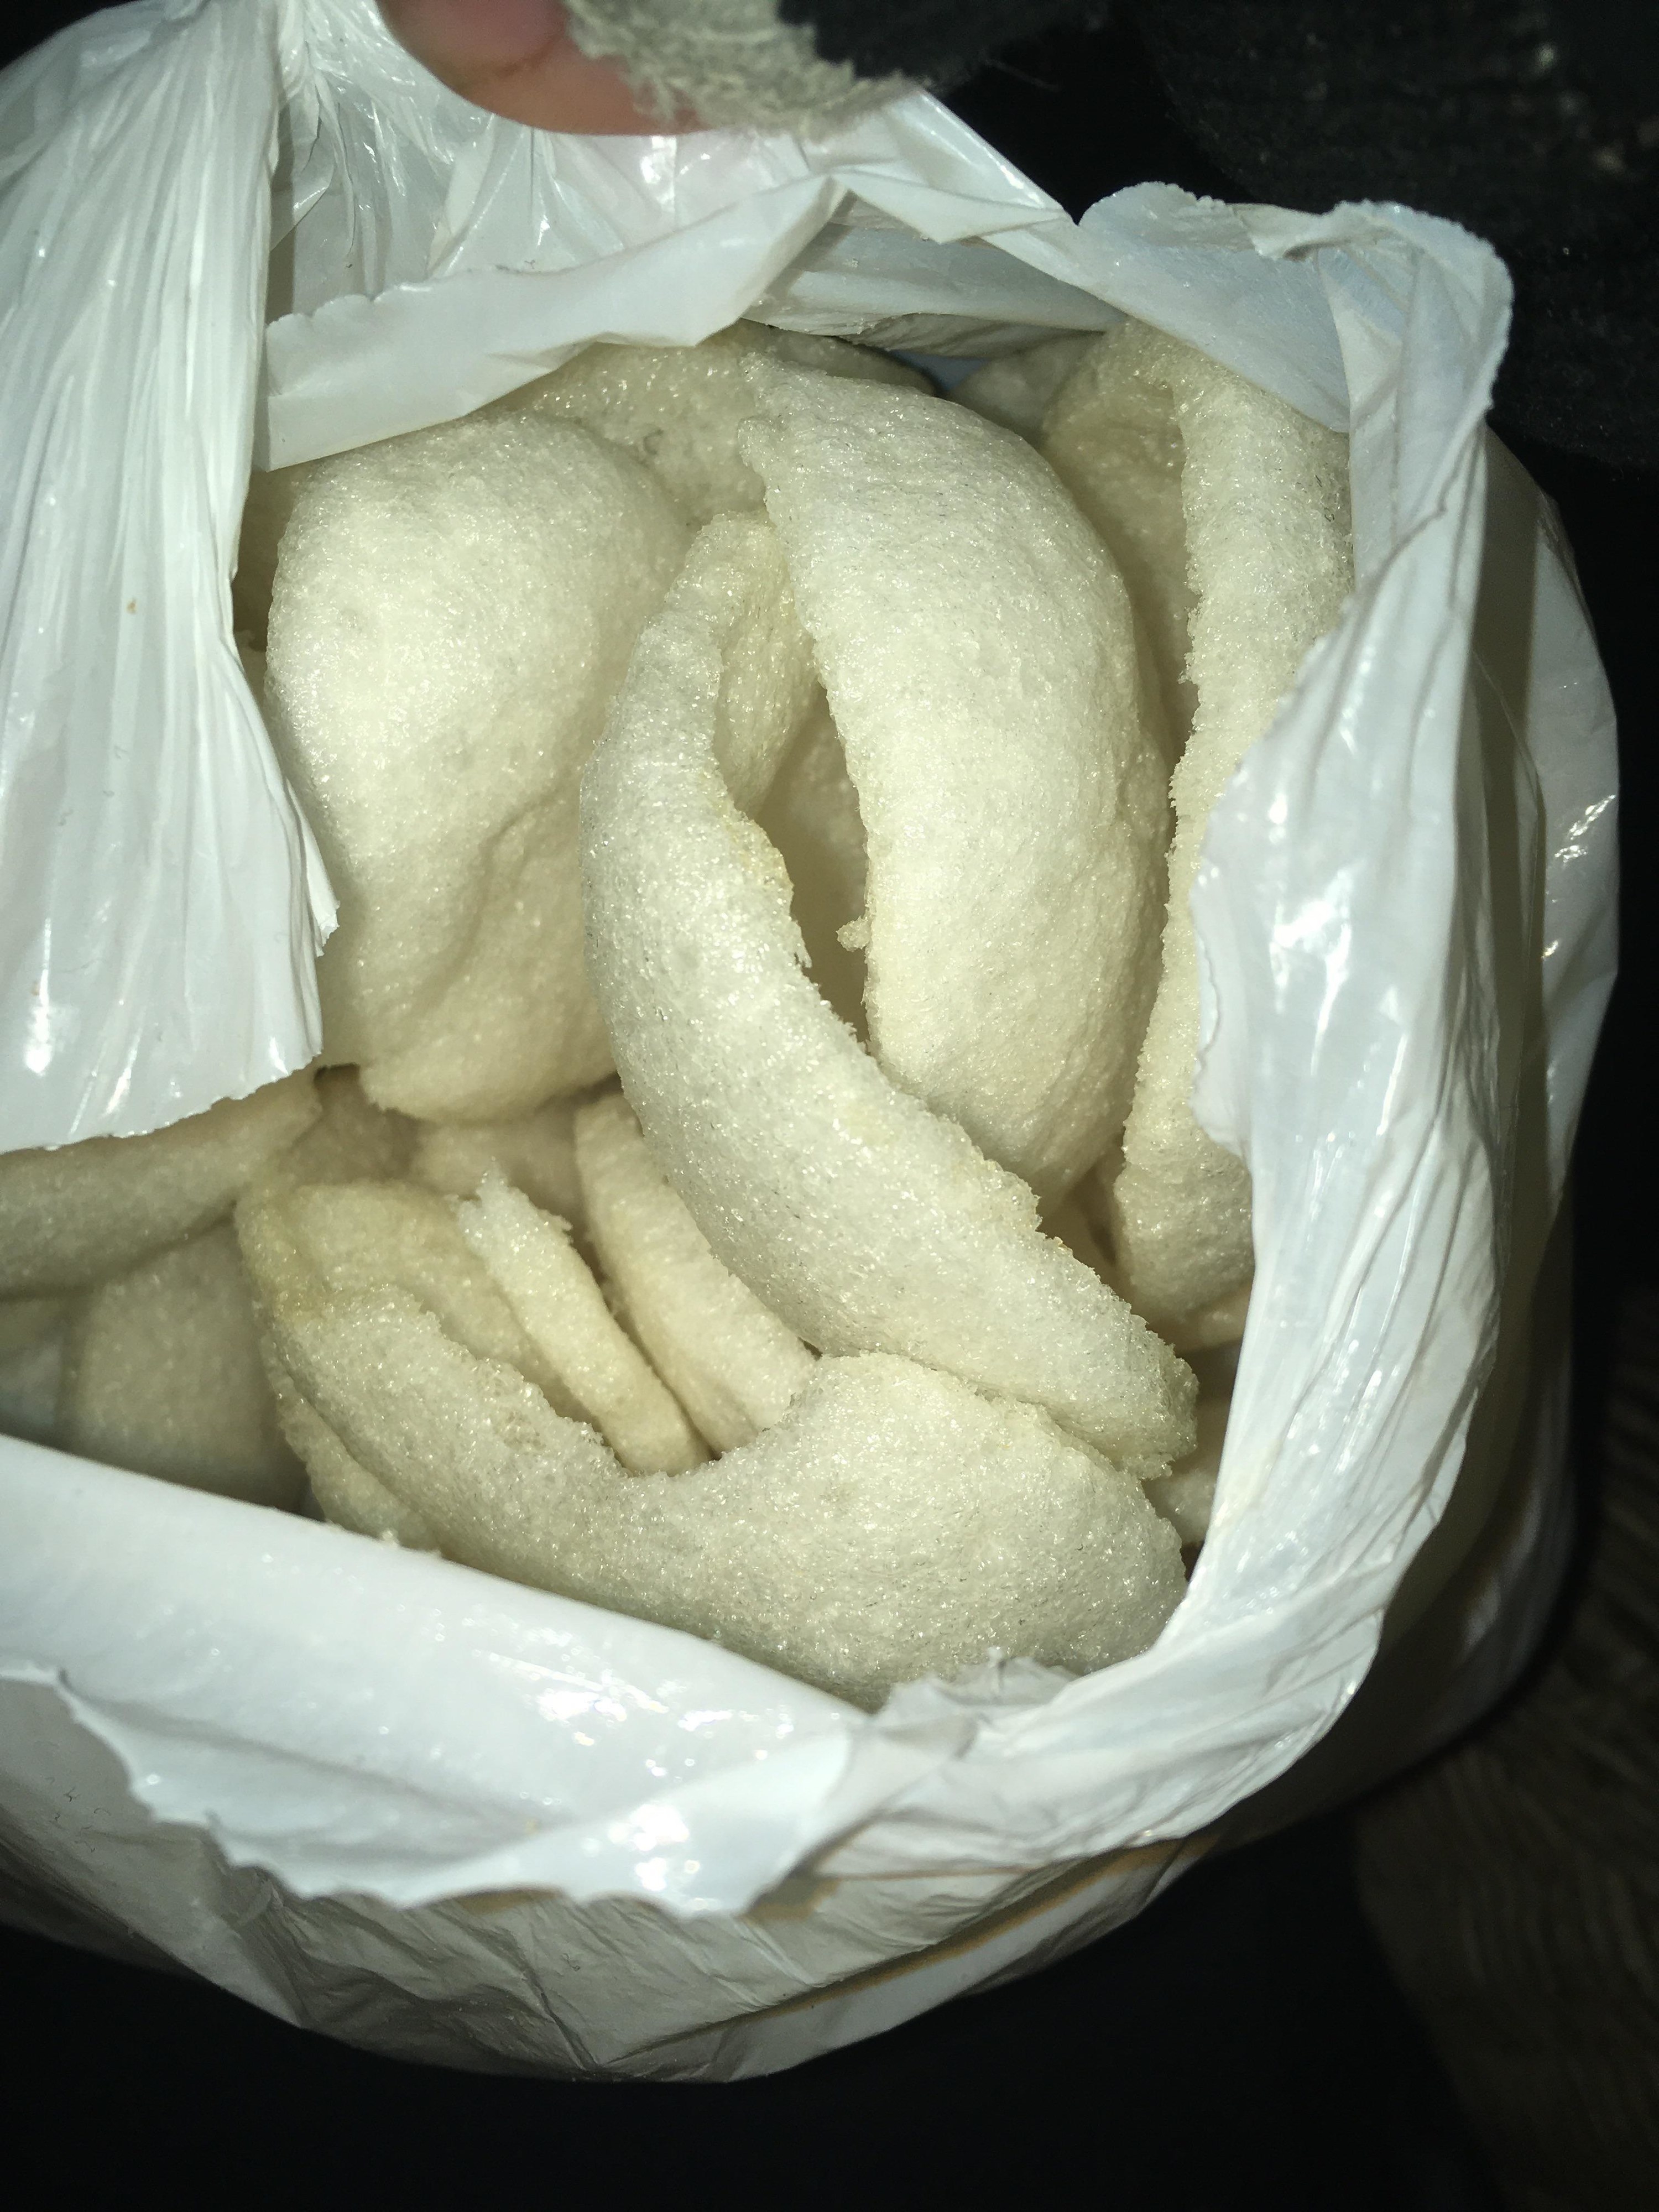 prawn crackers in a takeout bag